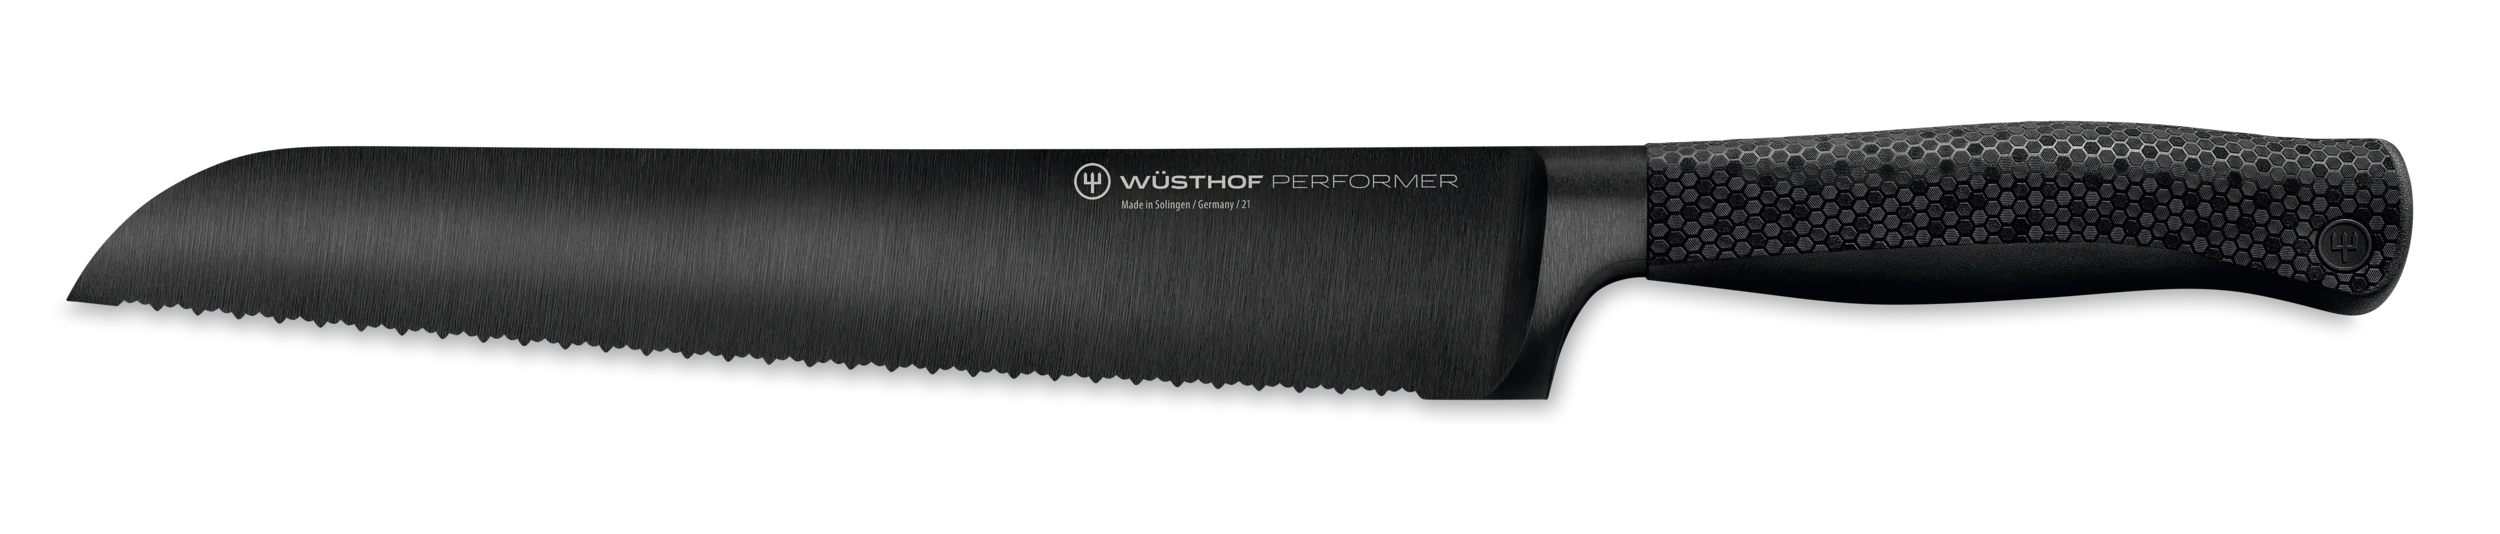 WUSTHOF Performer 9" Double-Serrated Bread Knife